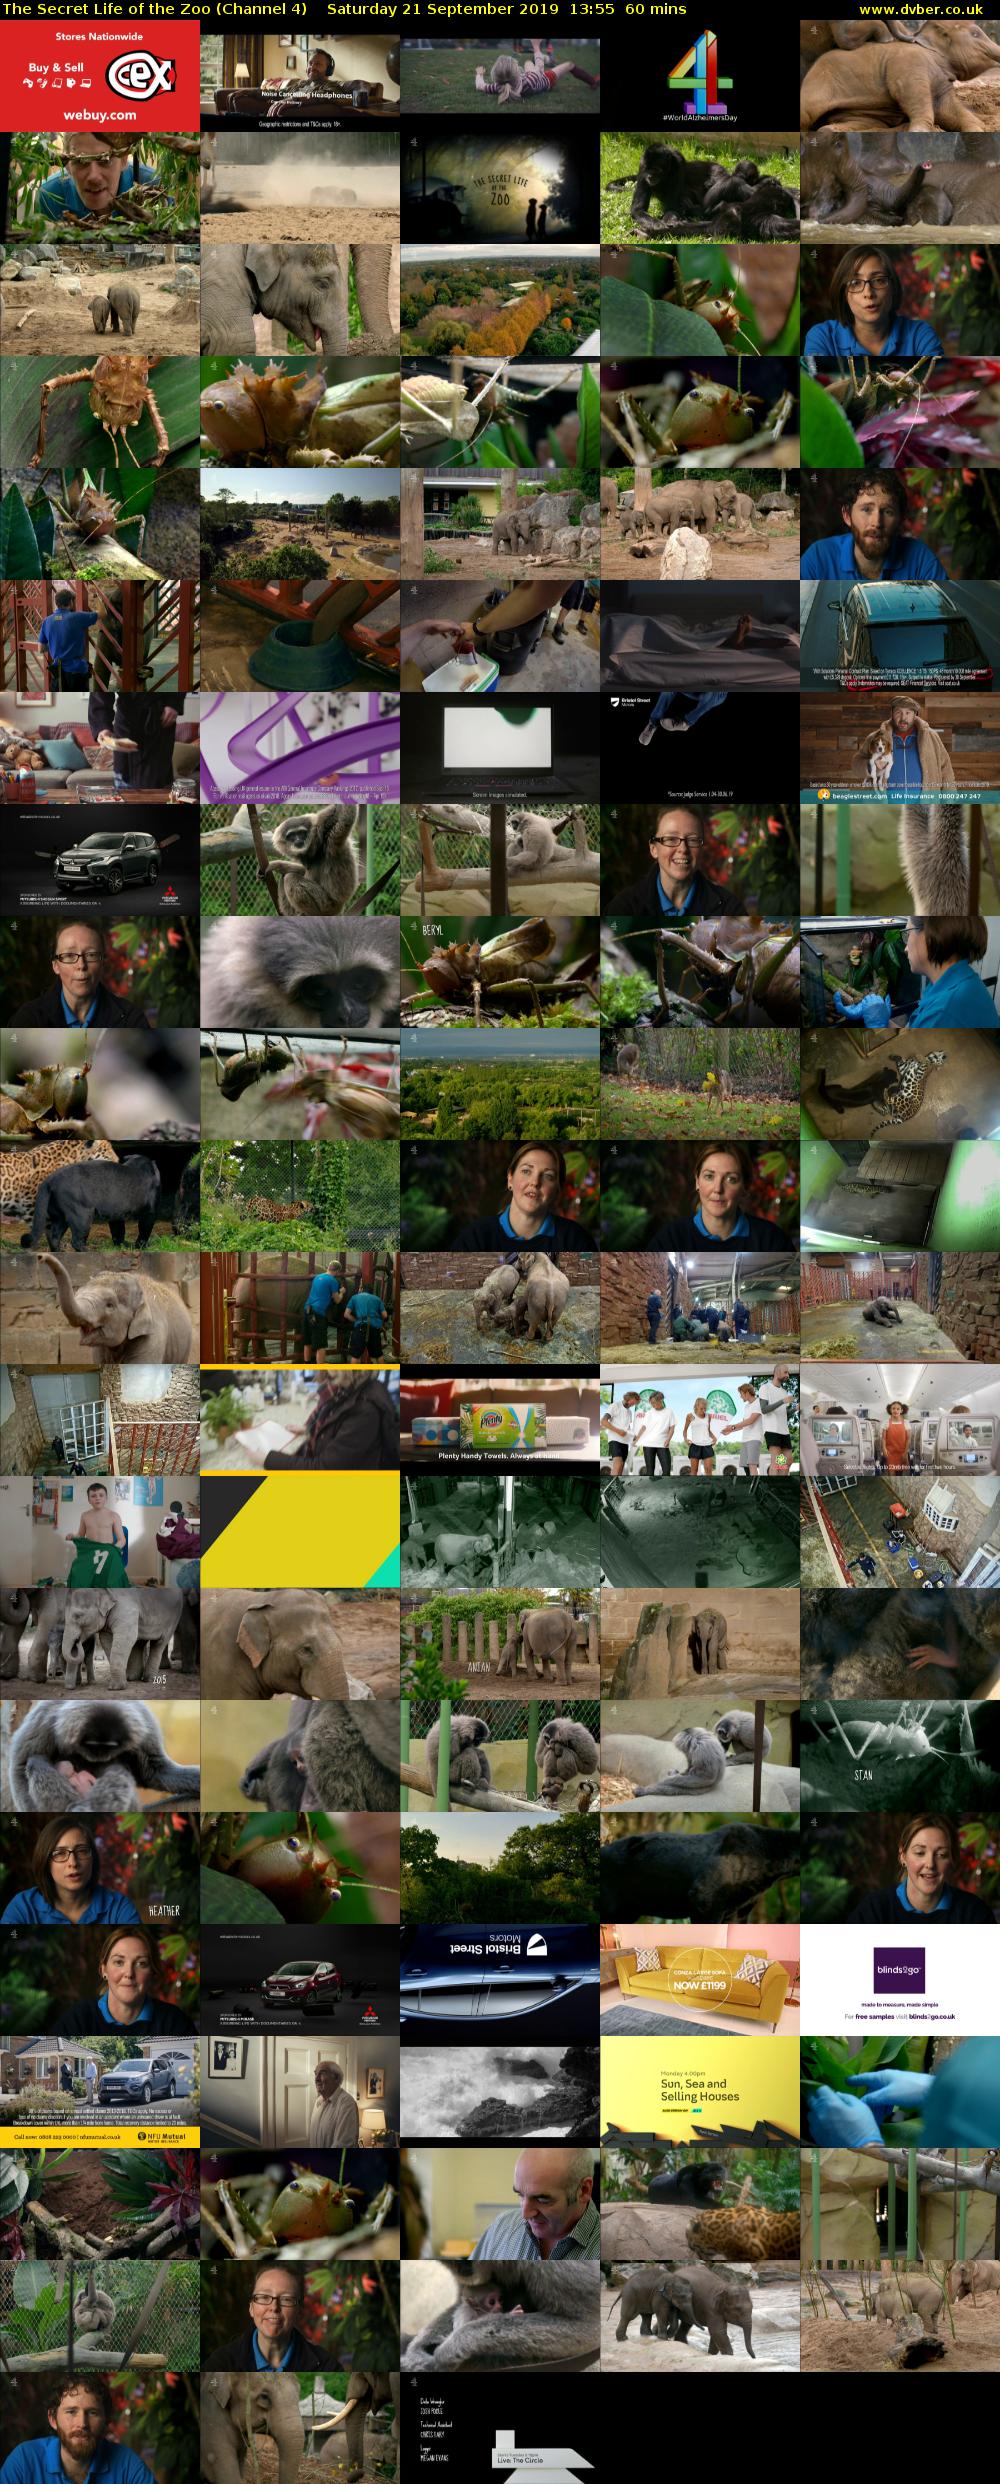 The Secret Life of the Zoo (Channel 4) Saturday 21 September 2019 13:55 - 14:55